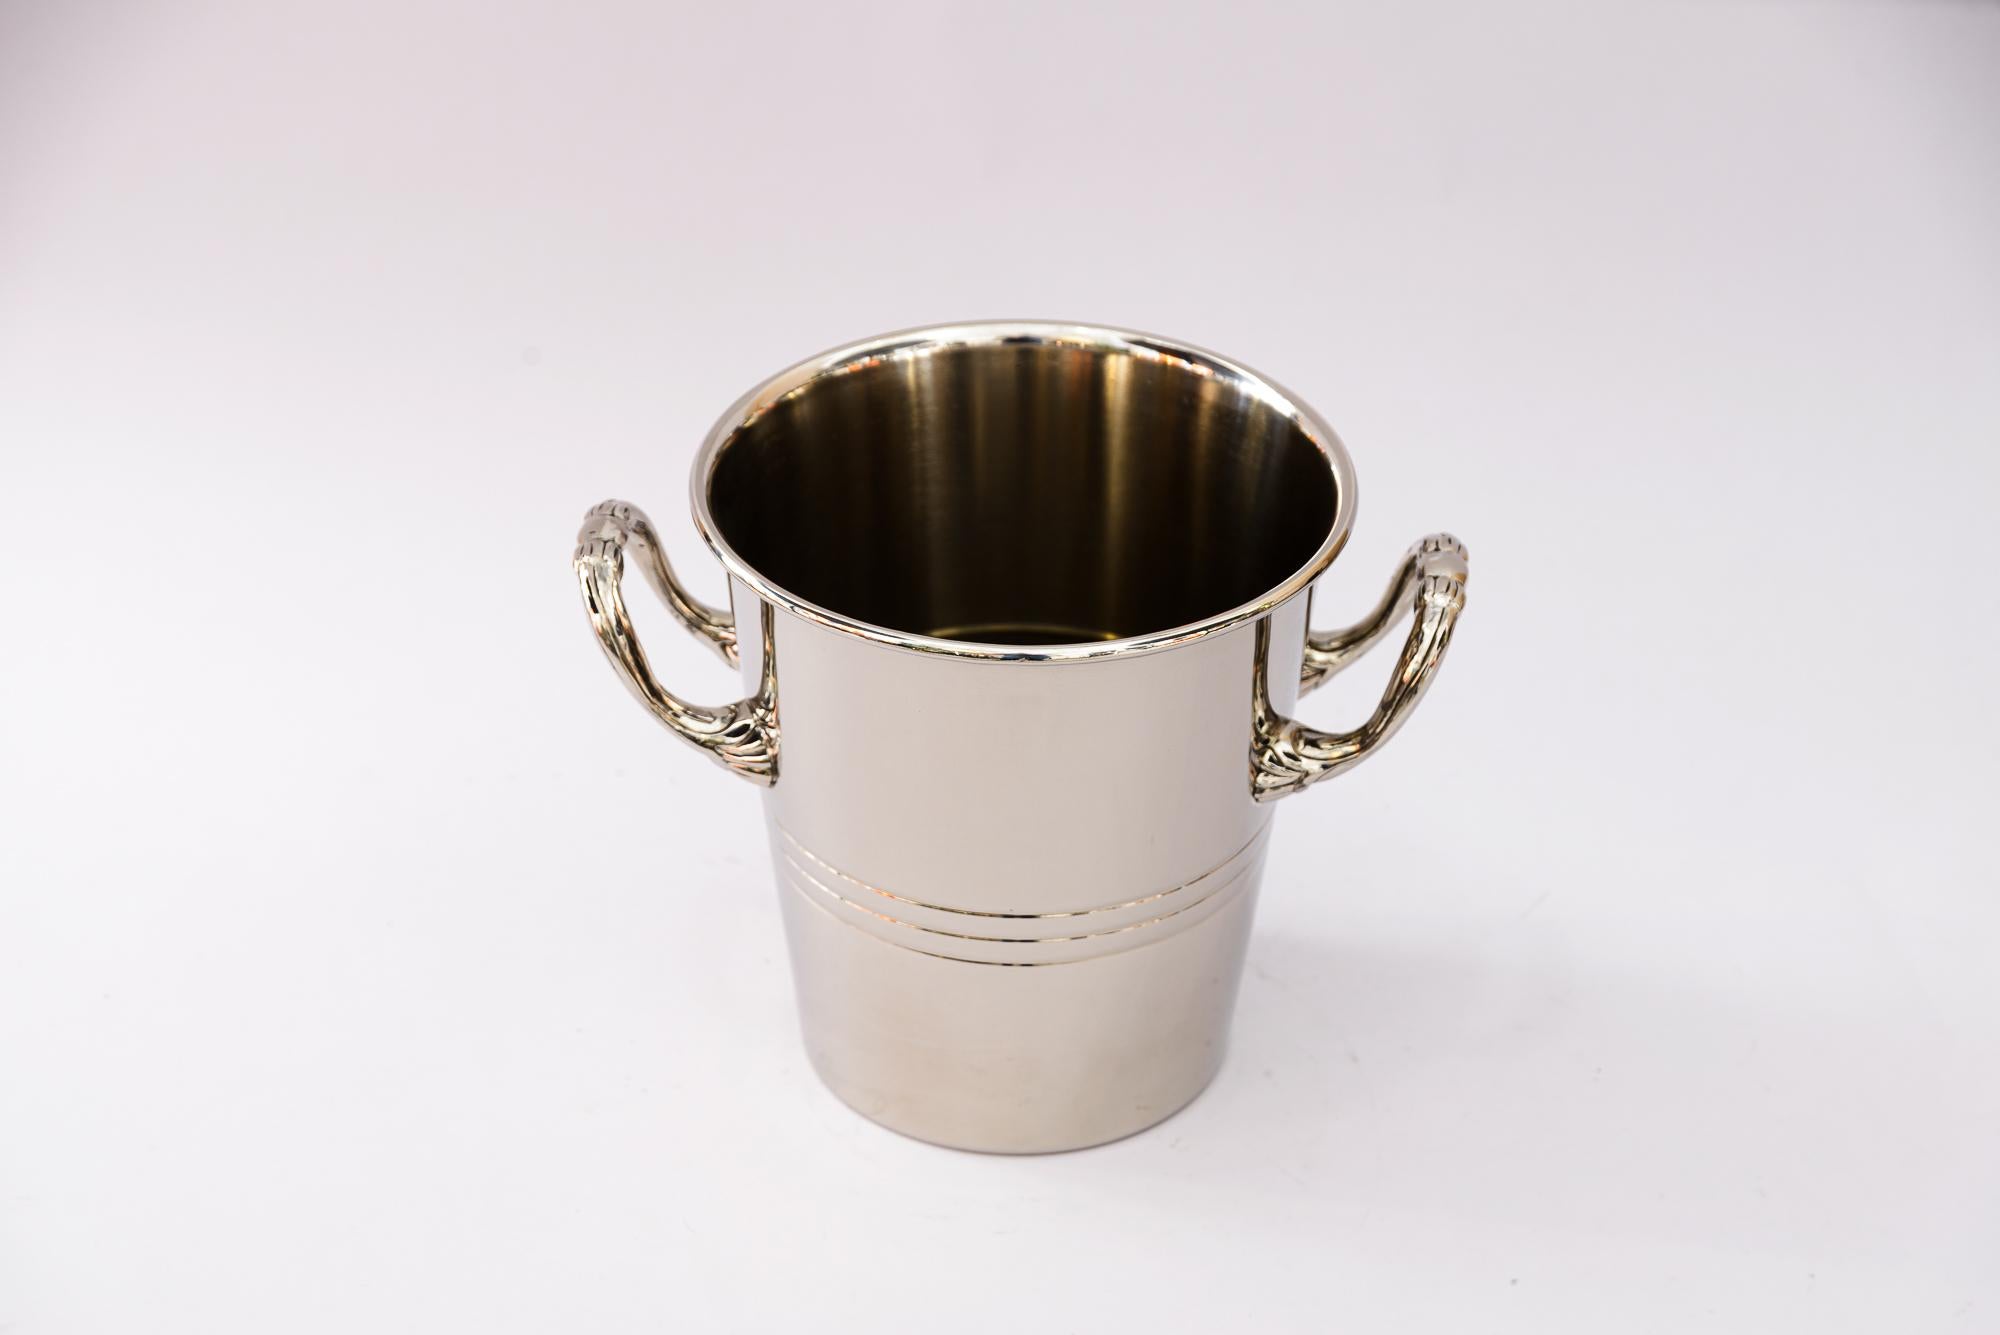 Champagne or wine cooler alpaca vienna around 1950s
Only Polished